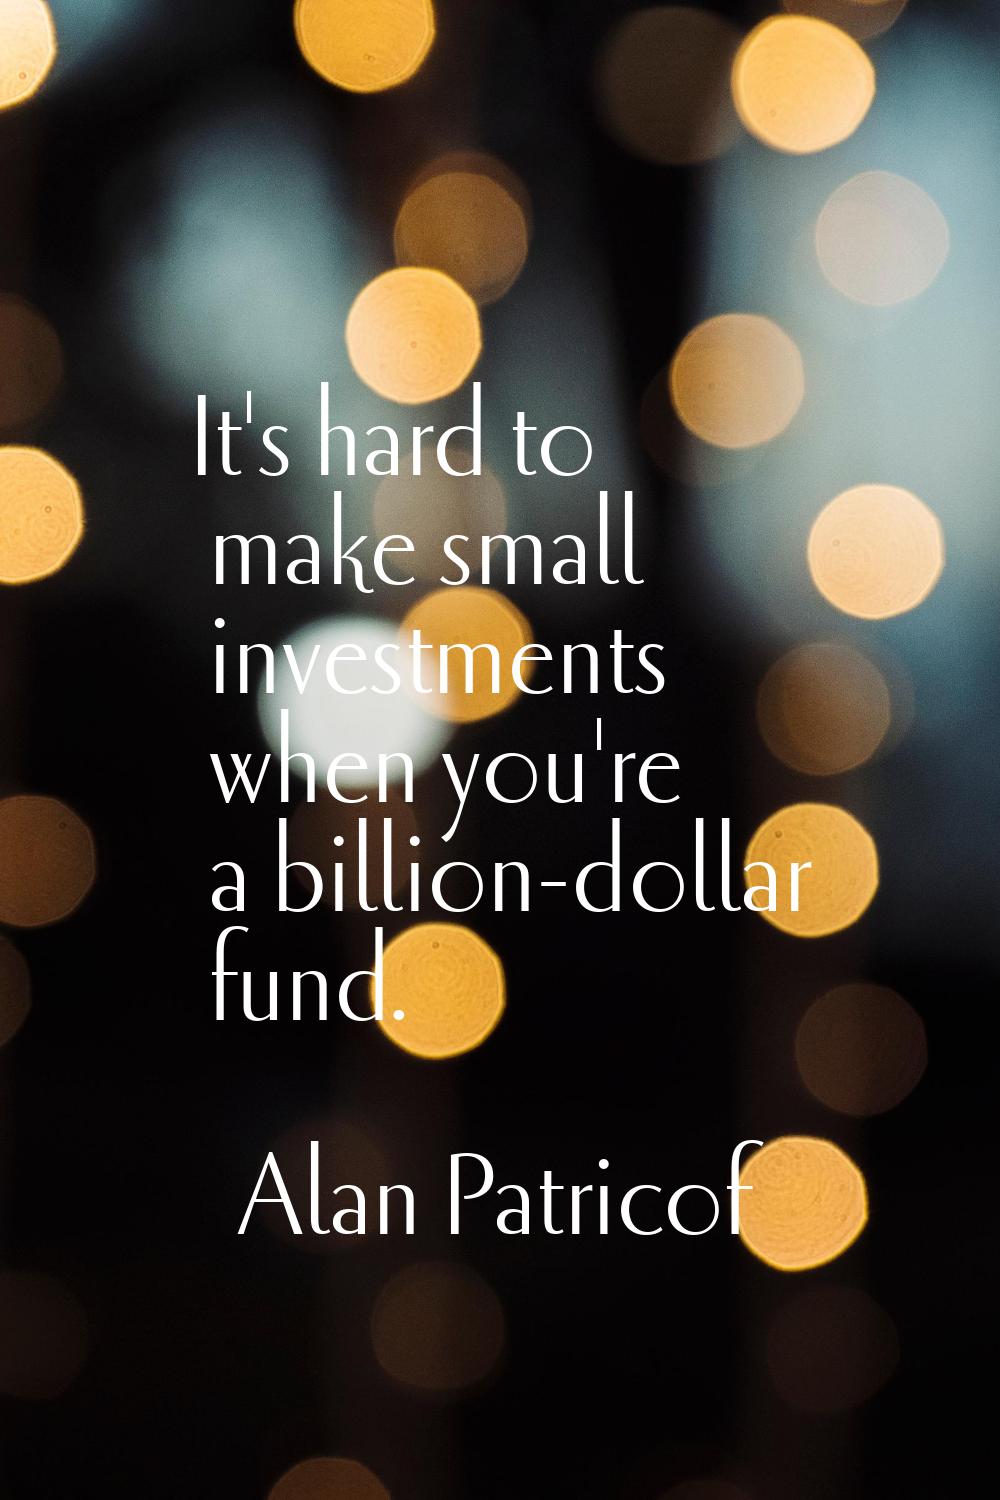 It's hard to make small investments when you're a billion-dollar fund.